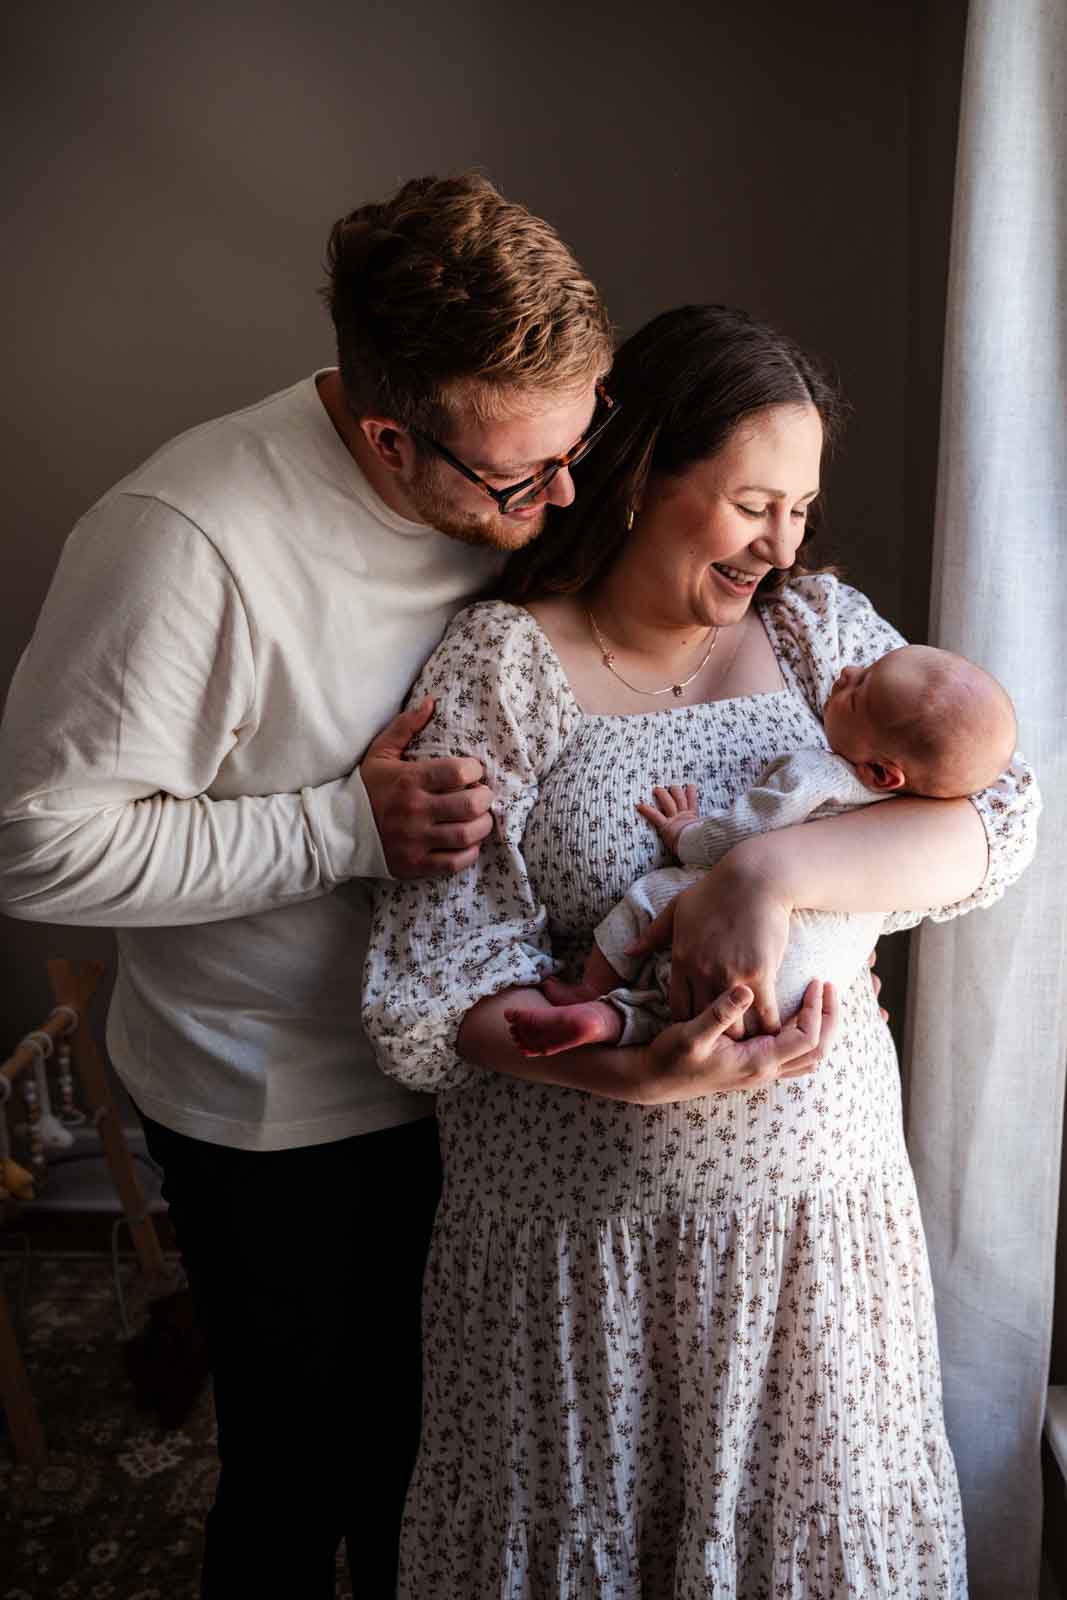 Newborn baby with parents smiling